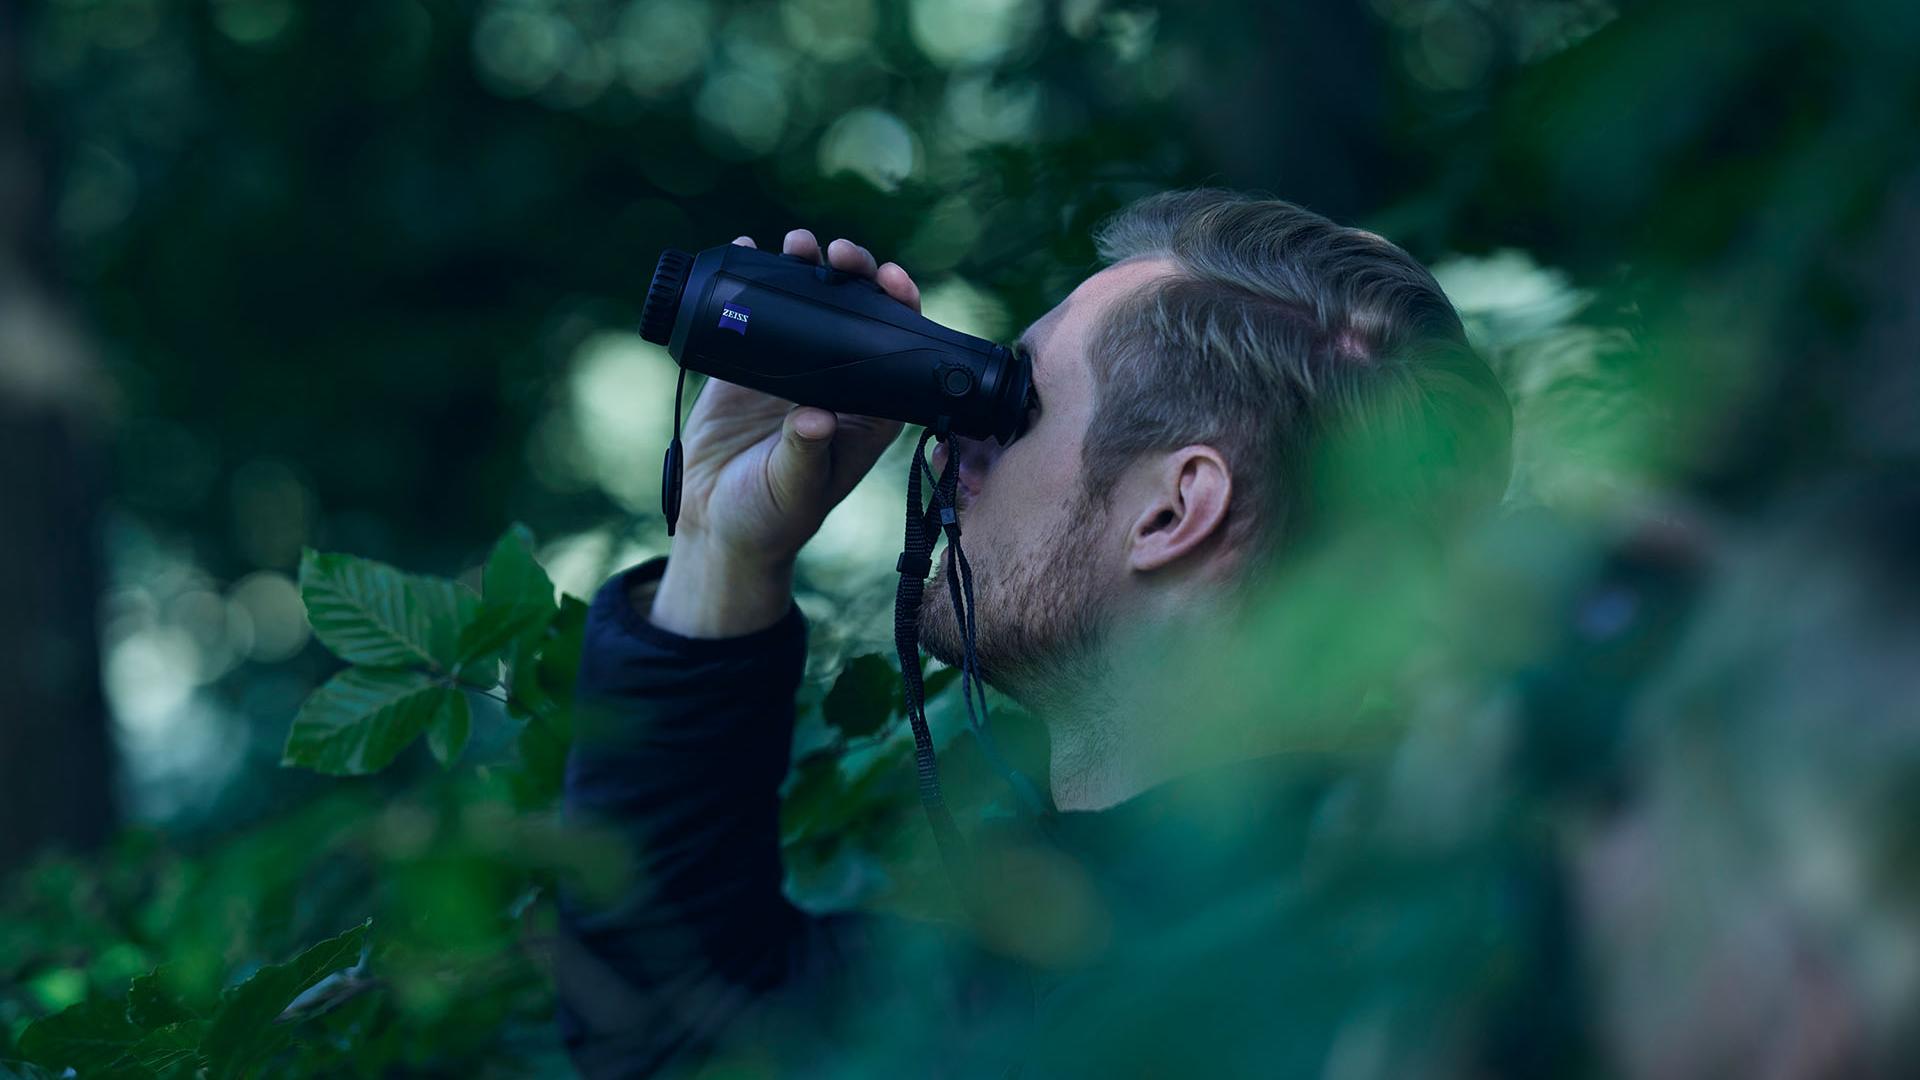 ZEISS thermal imaging cameras for a new bird watching experience 